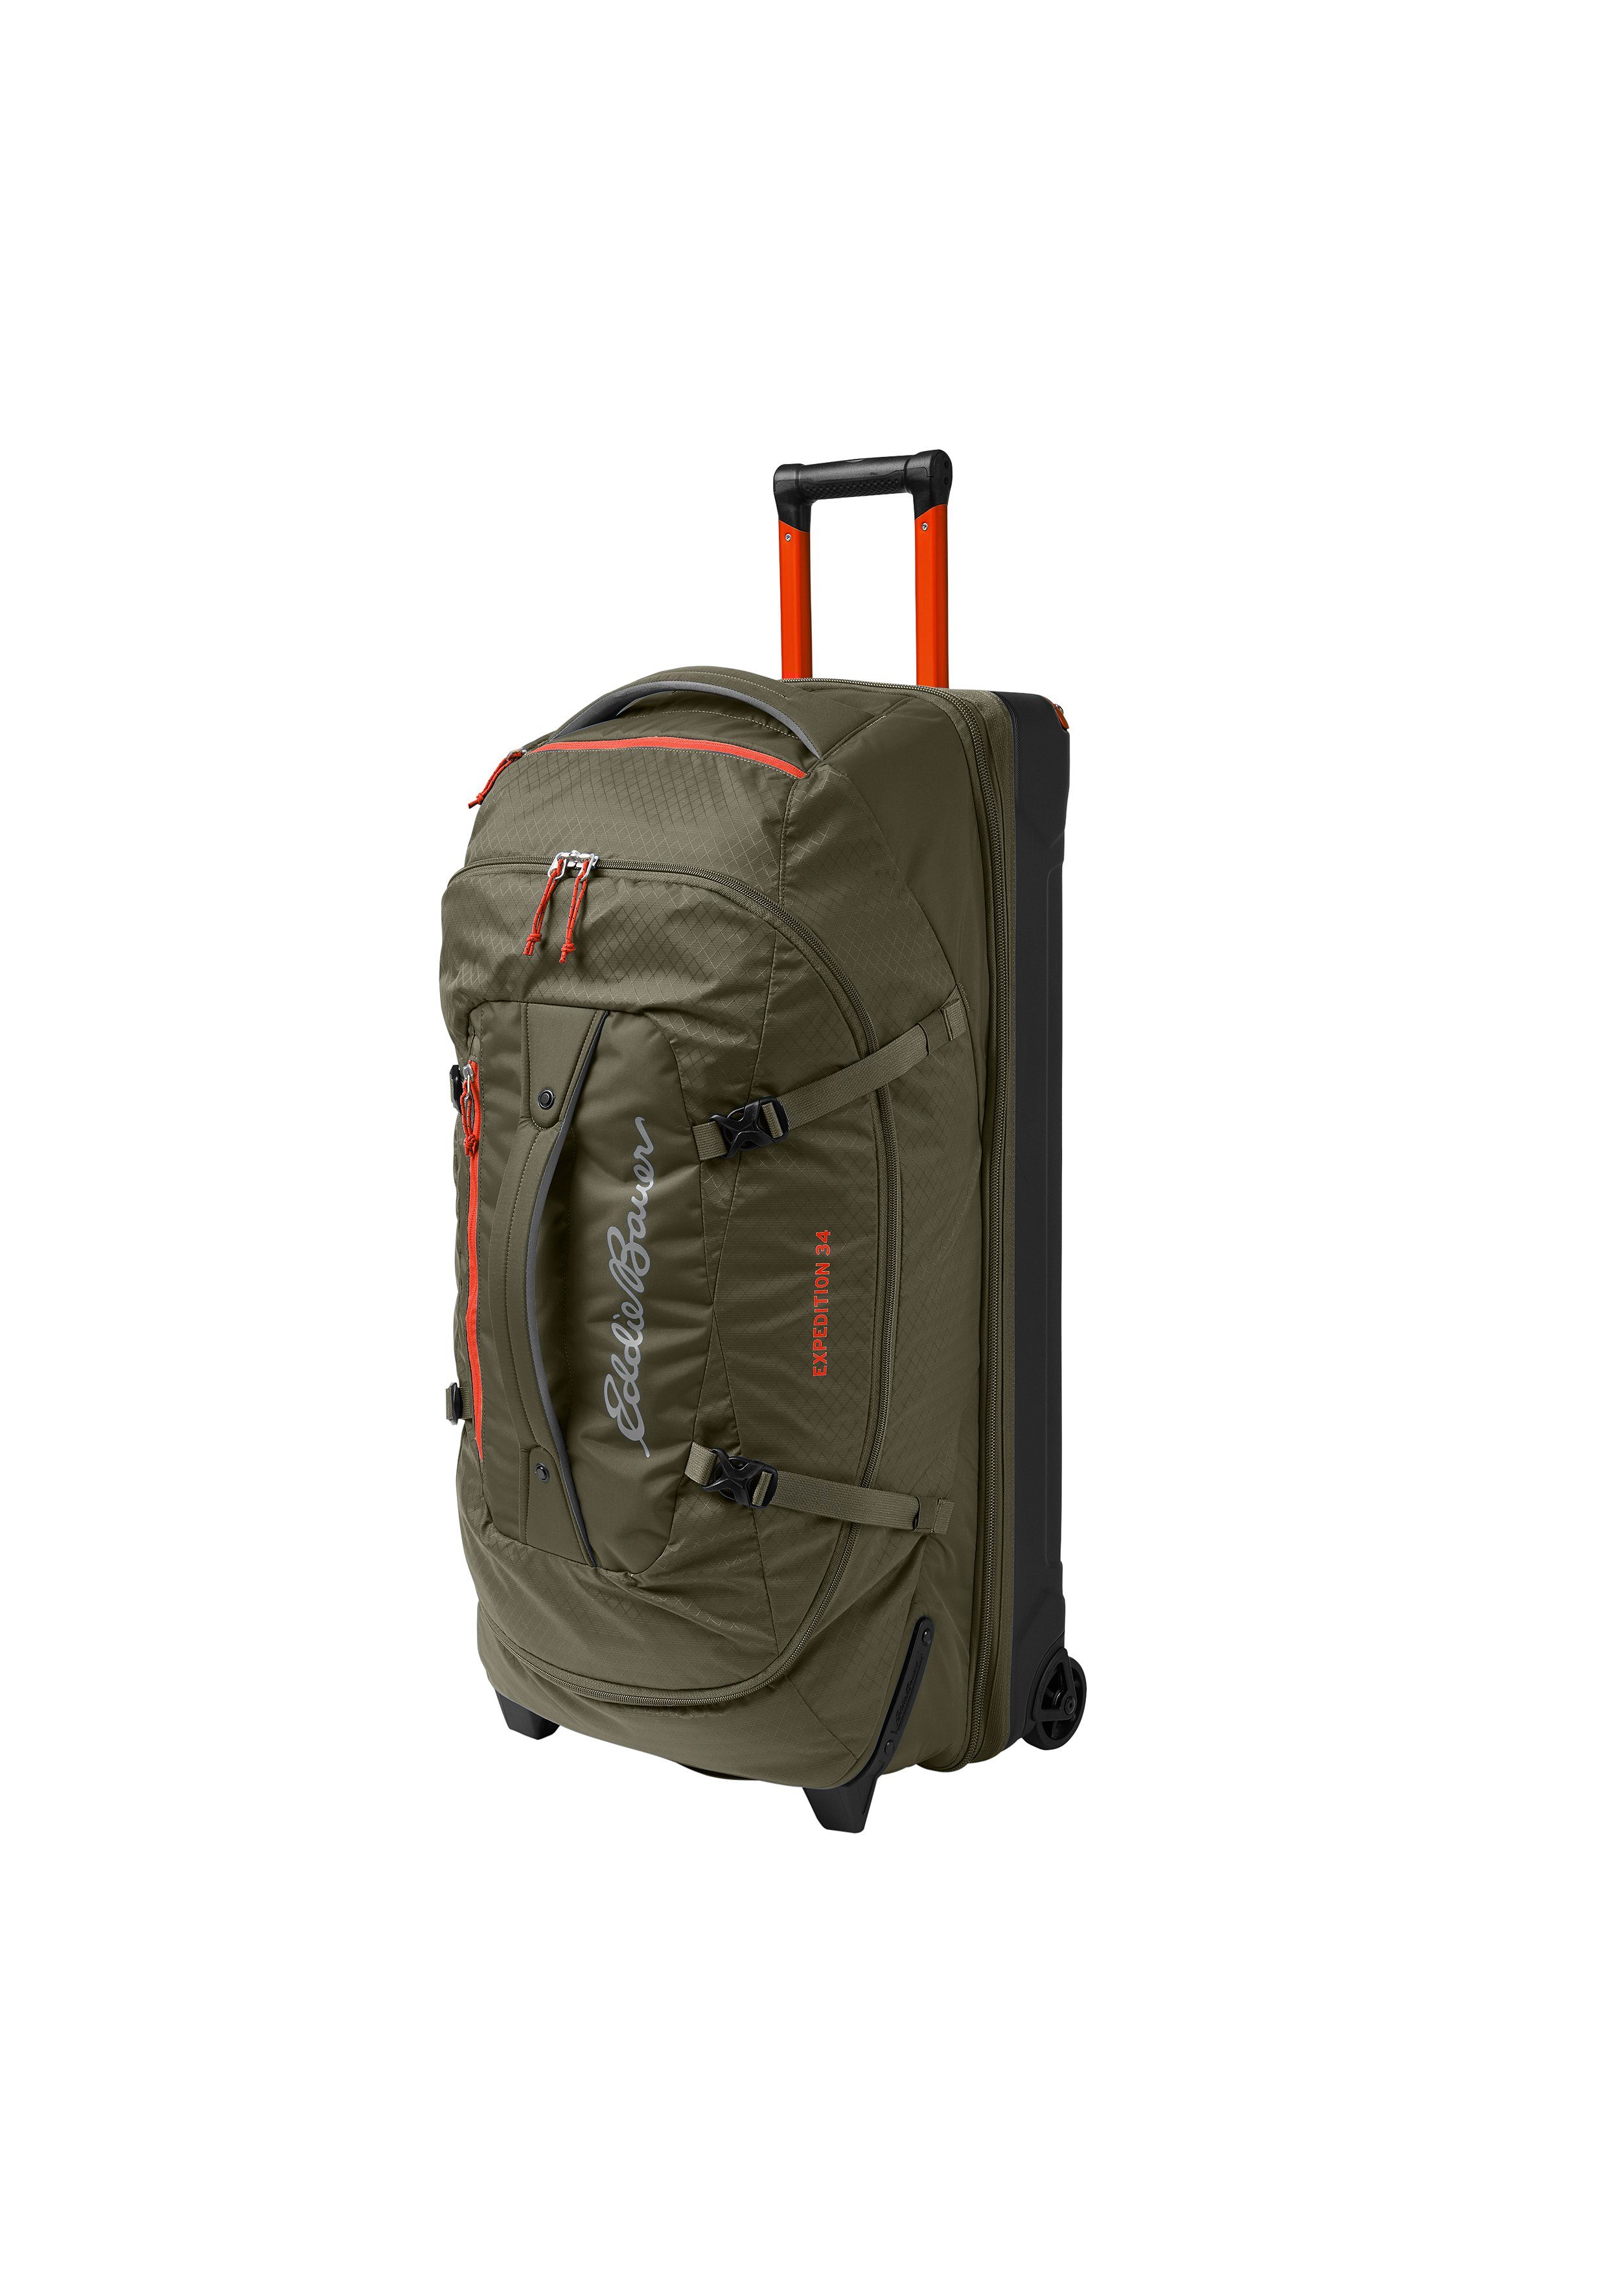 Eddie Bauer Trolley Expedition 2.0 - extra large